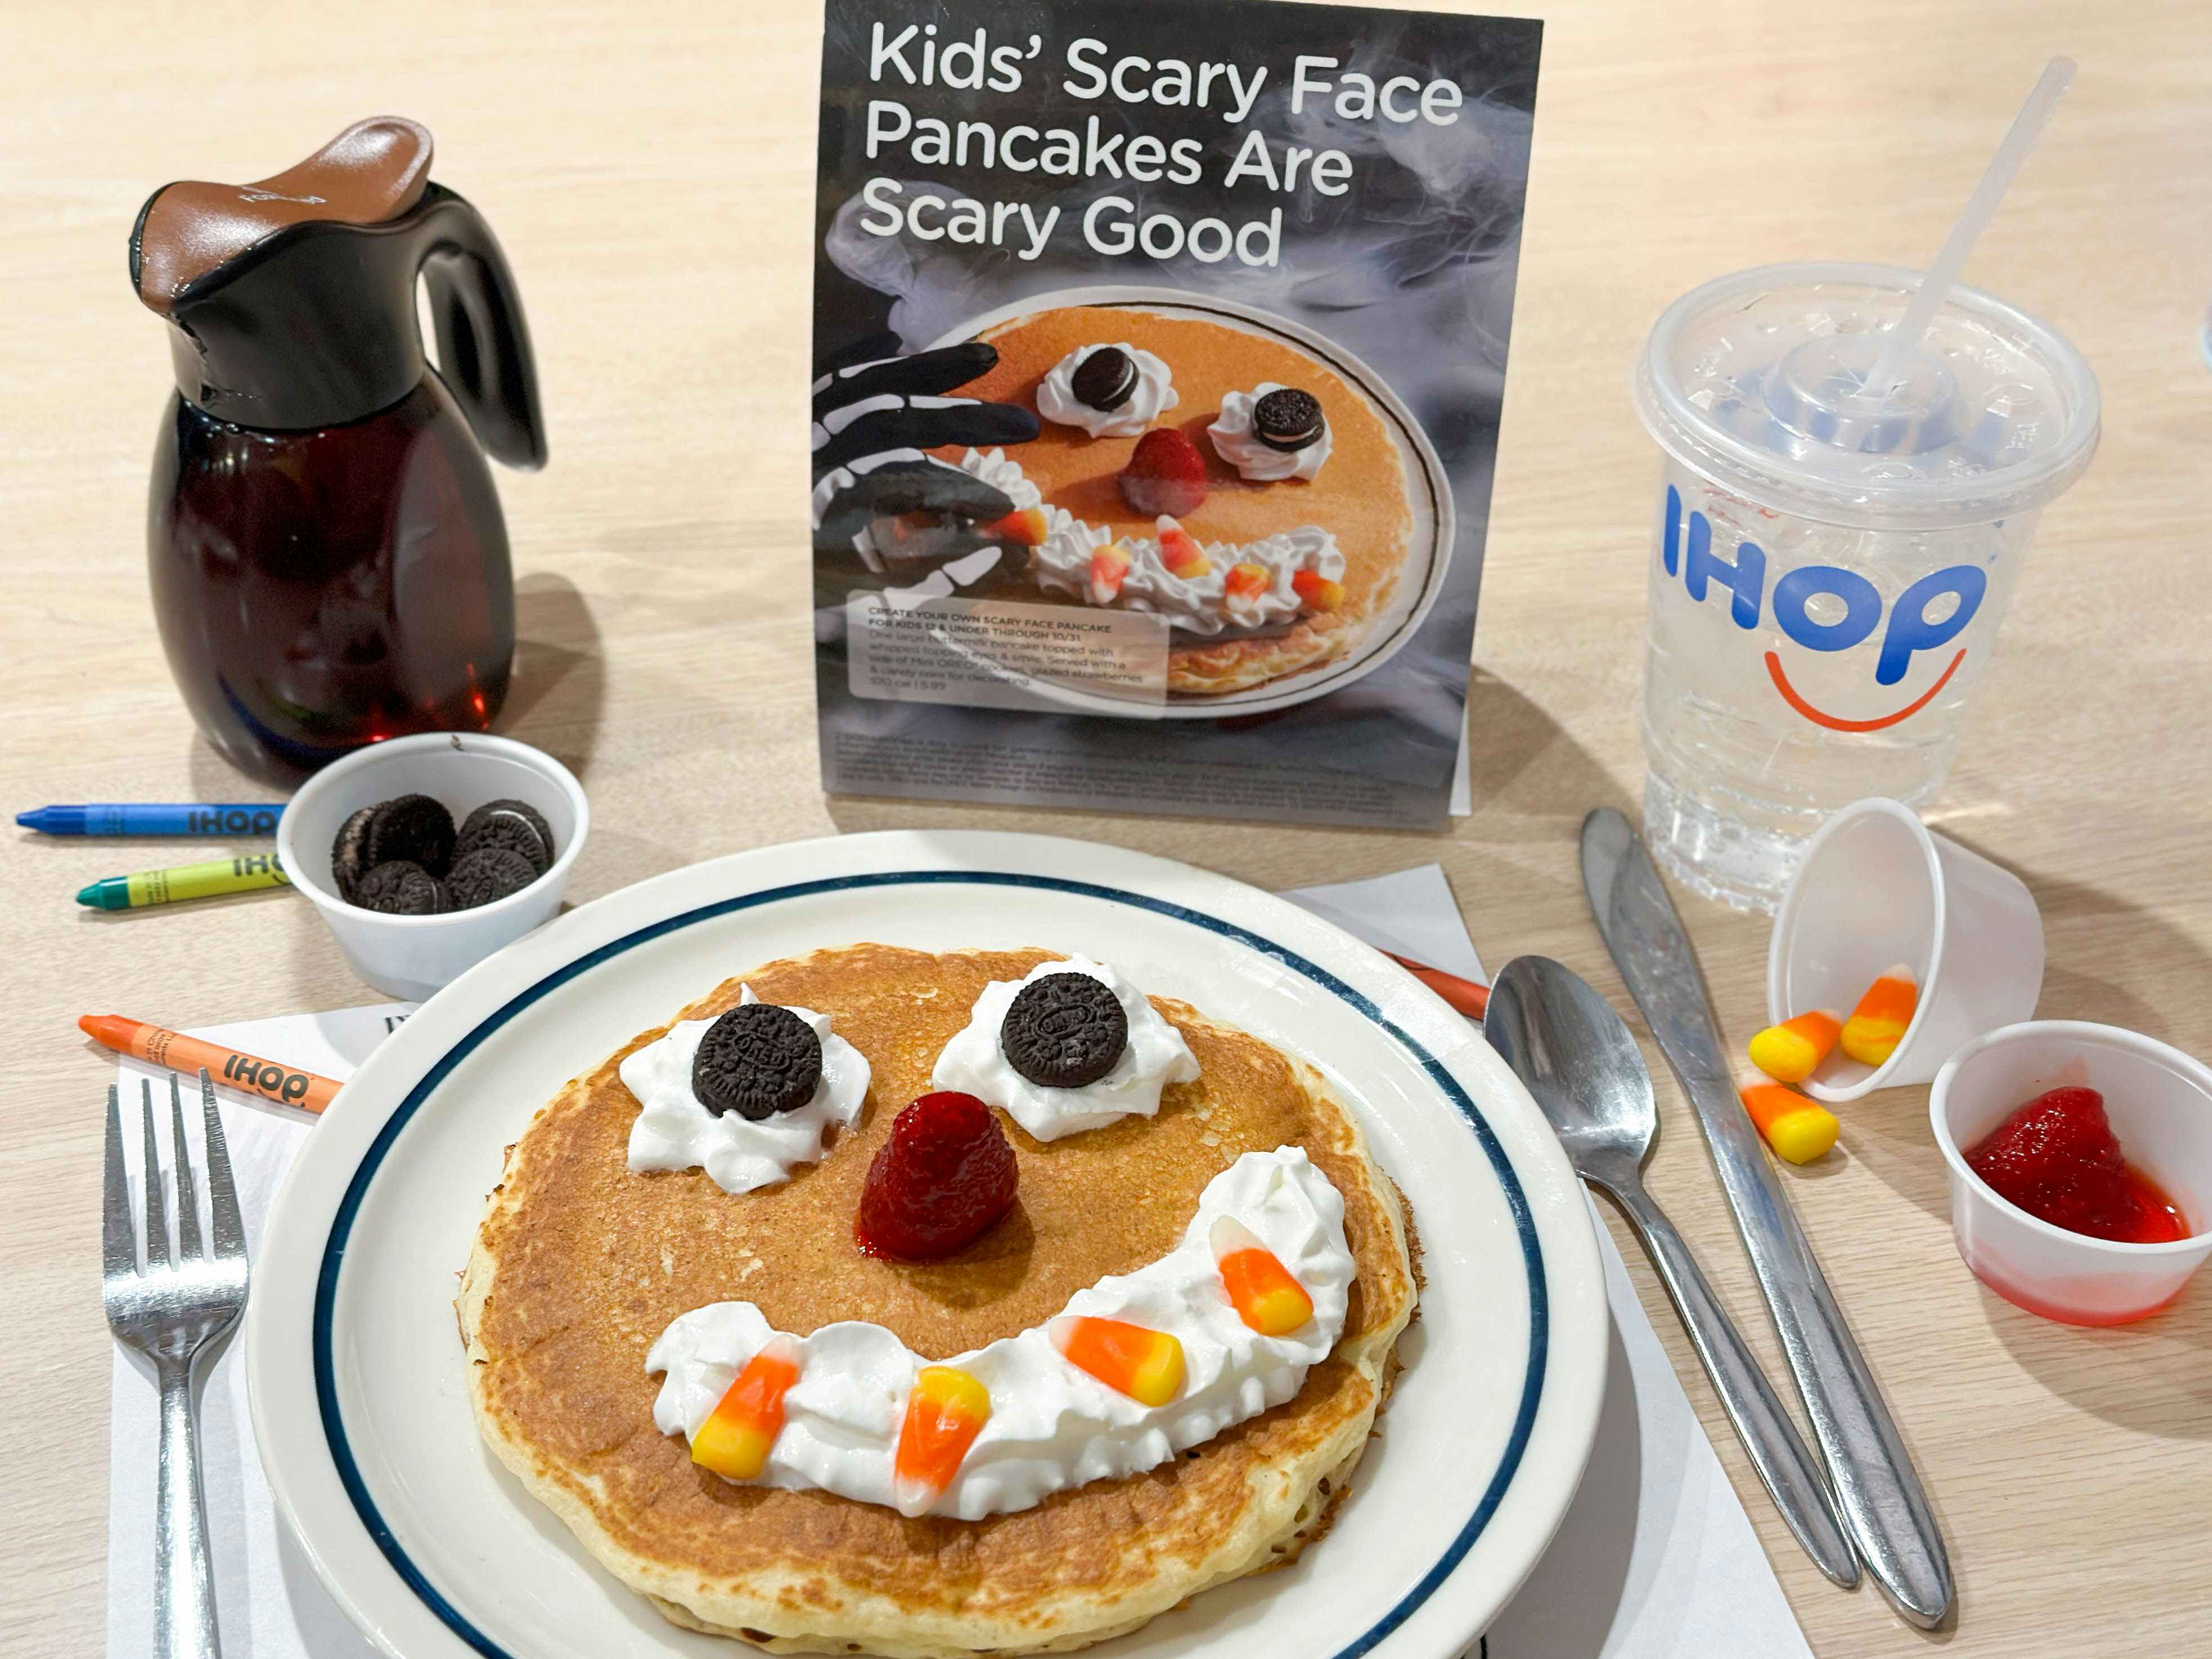 ihop scary face pancakes signage in restaurant